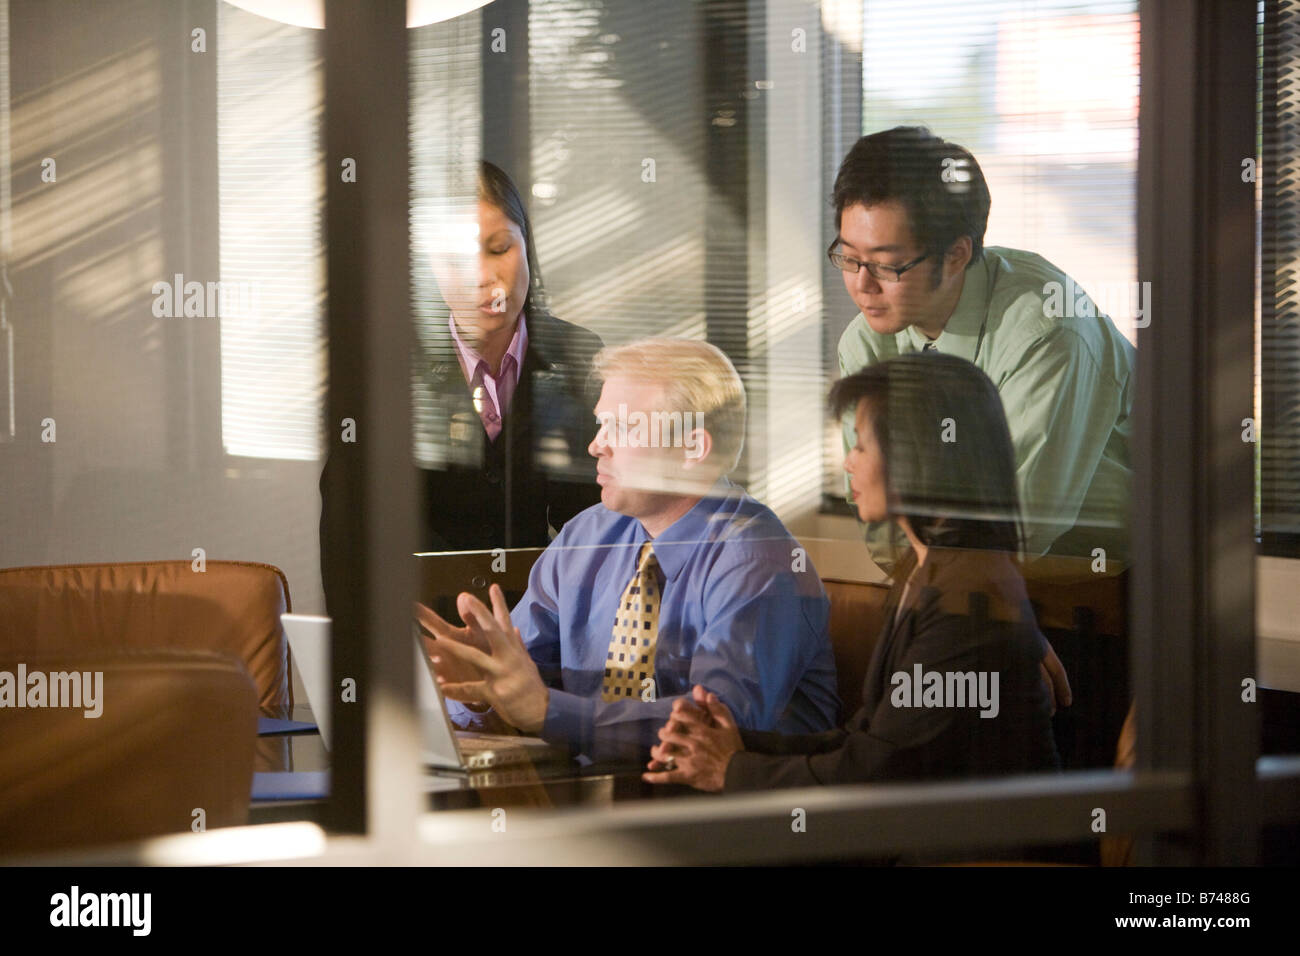 Caucasian businessman on laptop with group of Asian businesspeople Stock Photo